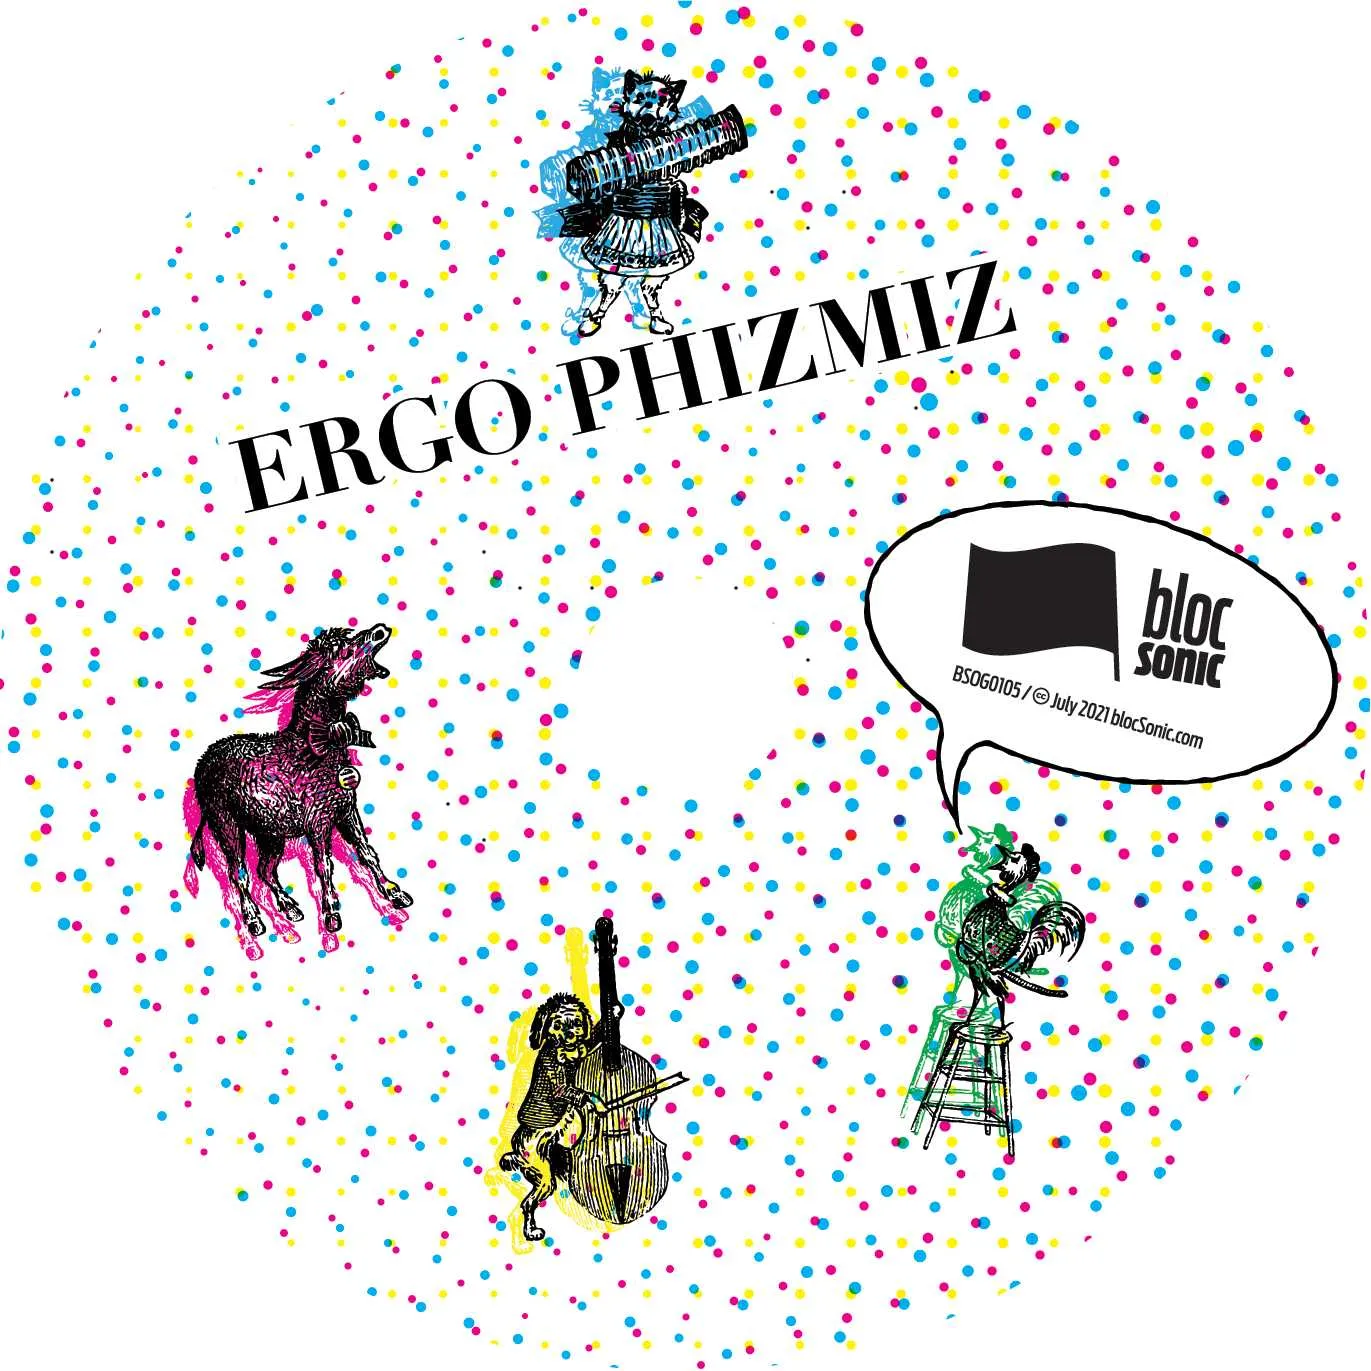 Album disc for “Thank Fuck For People Like Us” by Ergo Phizmiz